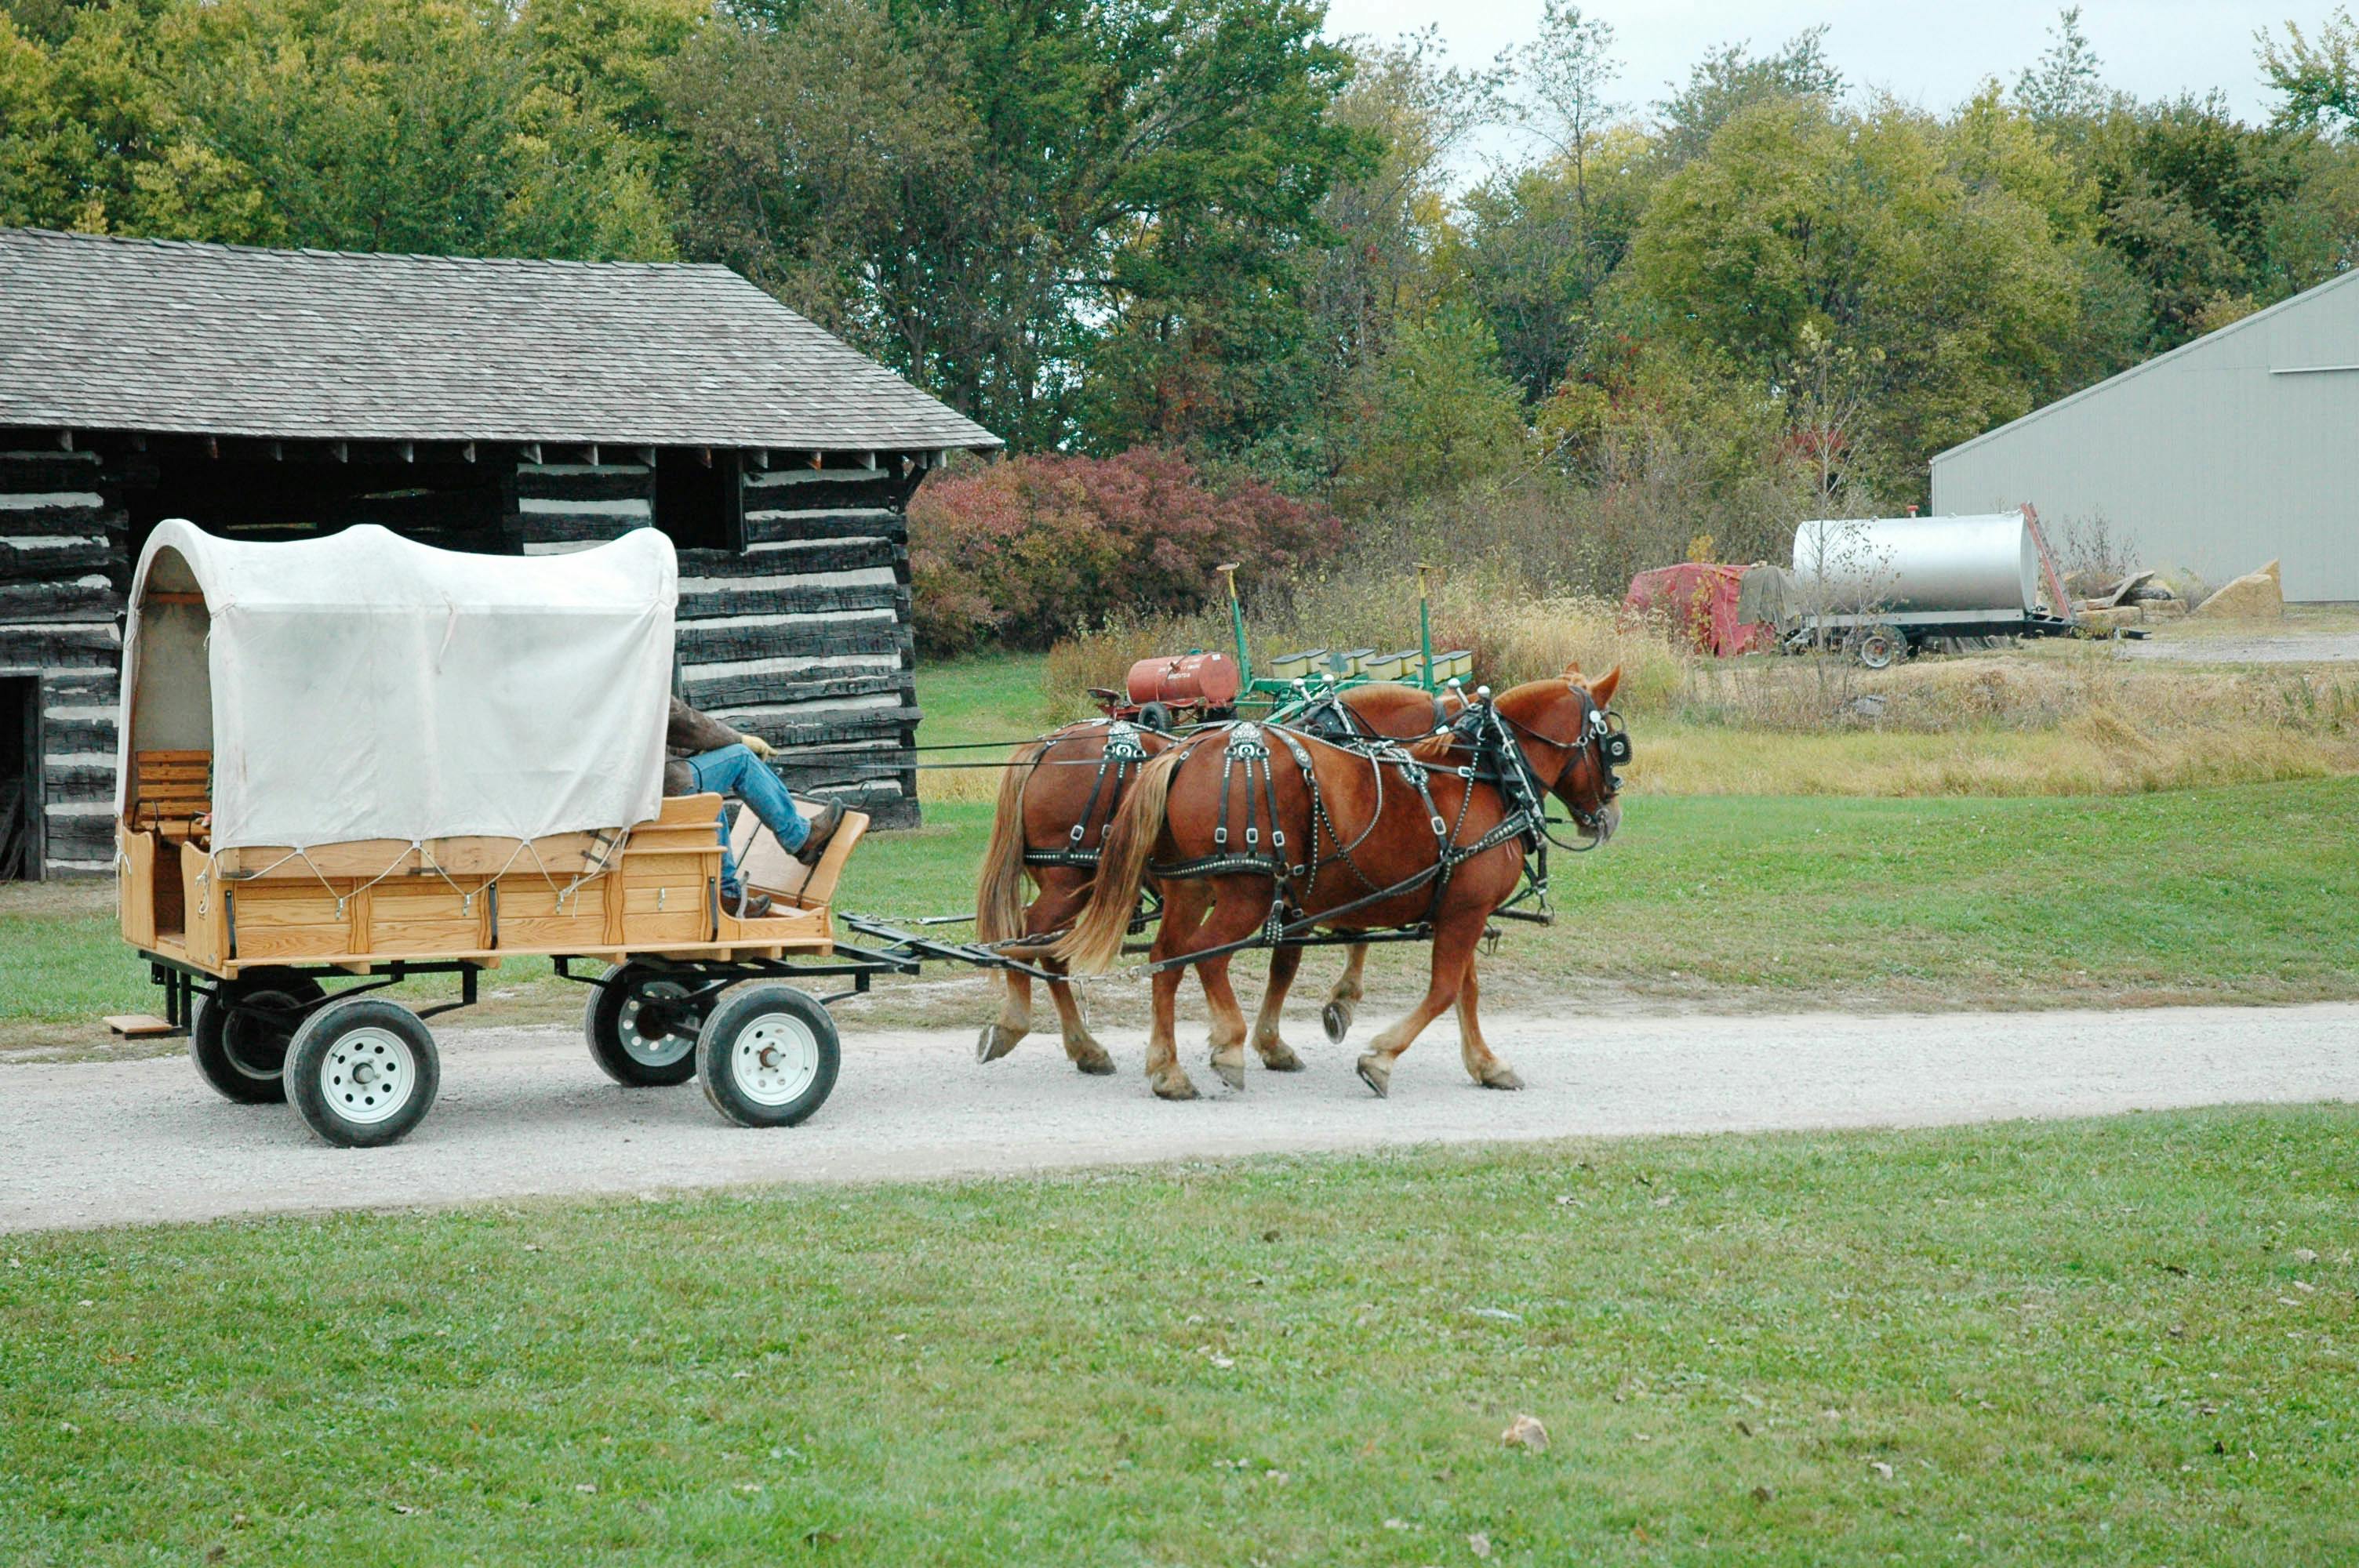 Lathrop Anique Show Grounds_ Living History Wagon.jpg